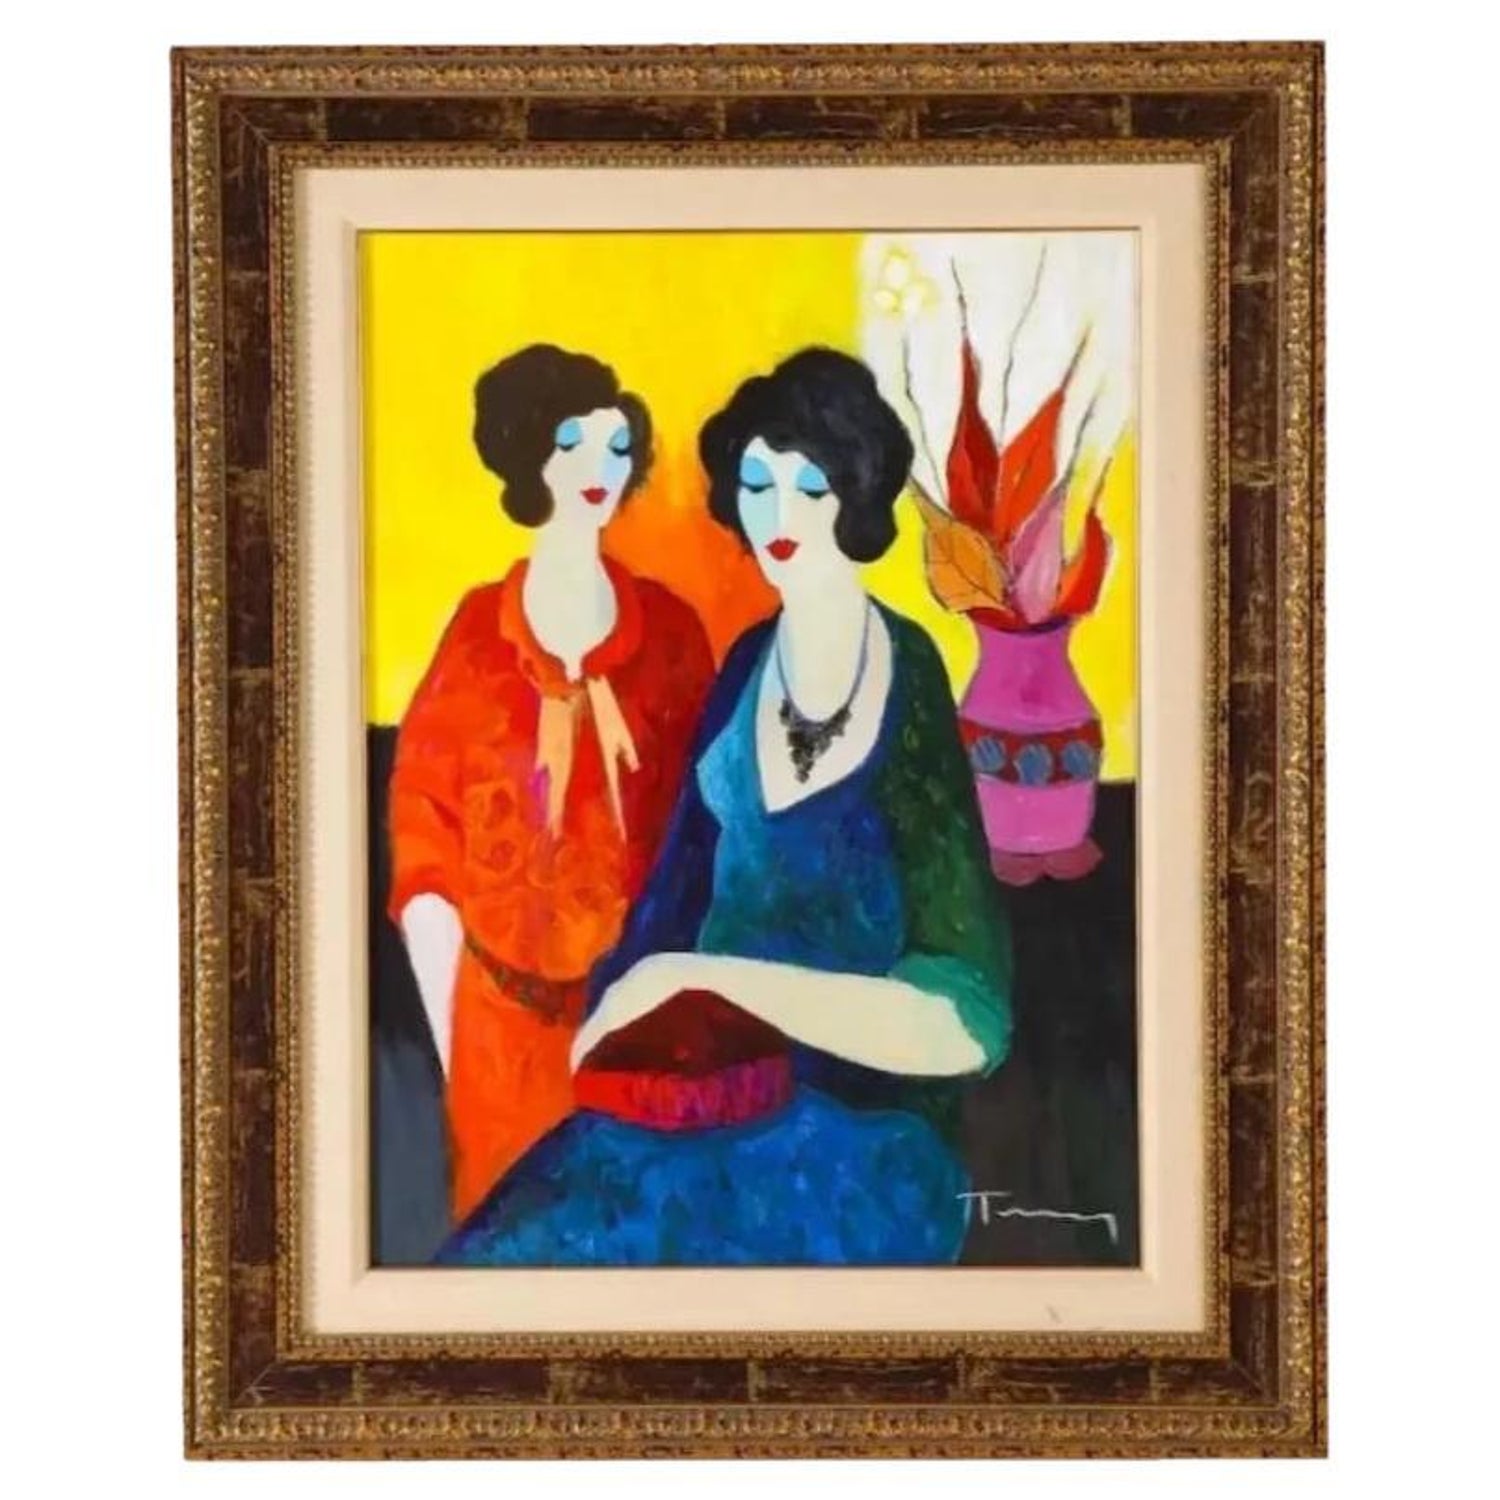 Itzchak Tarkay "Two Sisters" Oil on Canvas Painting at 1stDibs